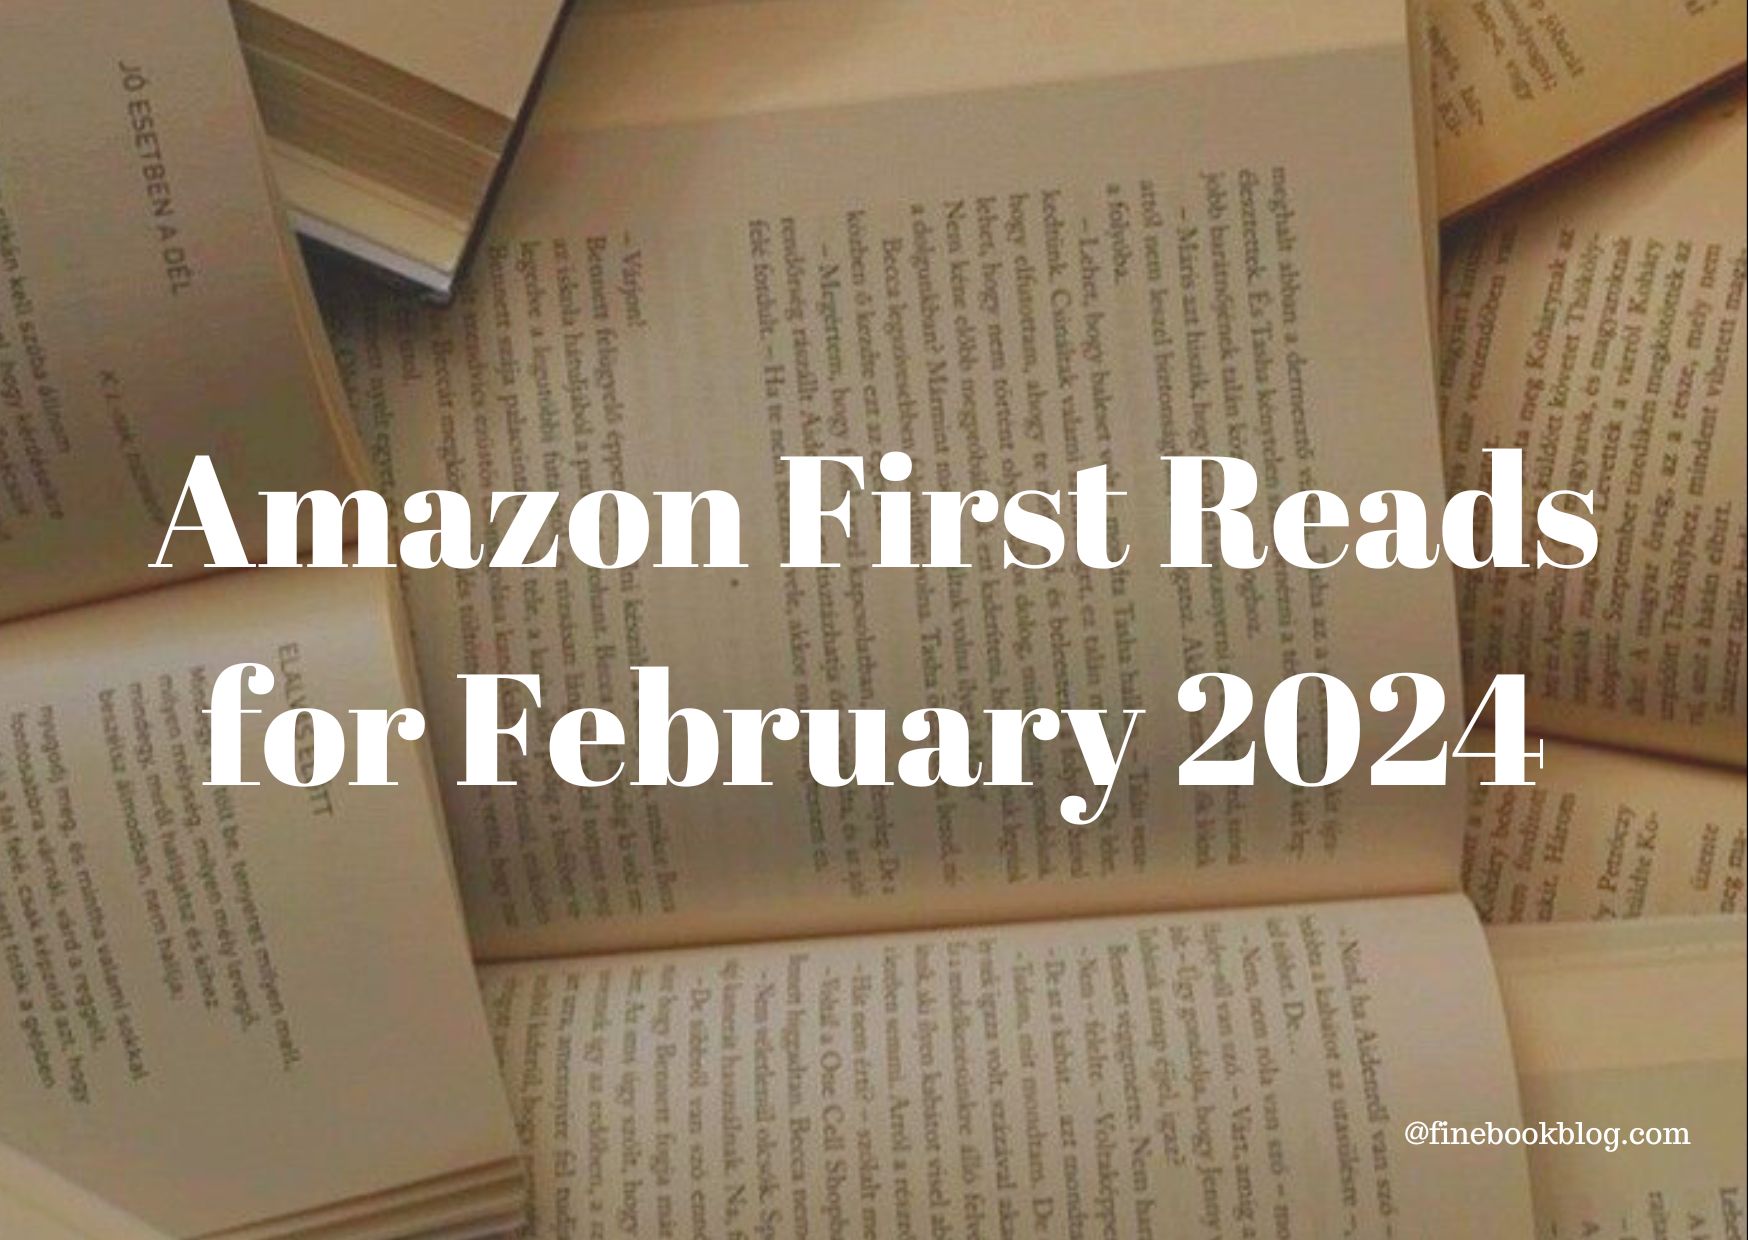 Amazon-first-reads-february-2024-by-amazon-editors